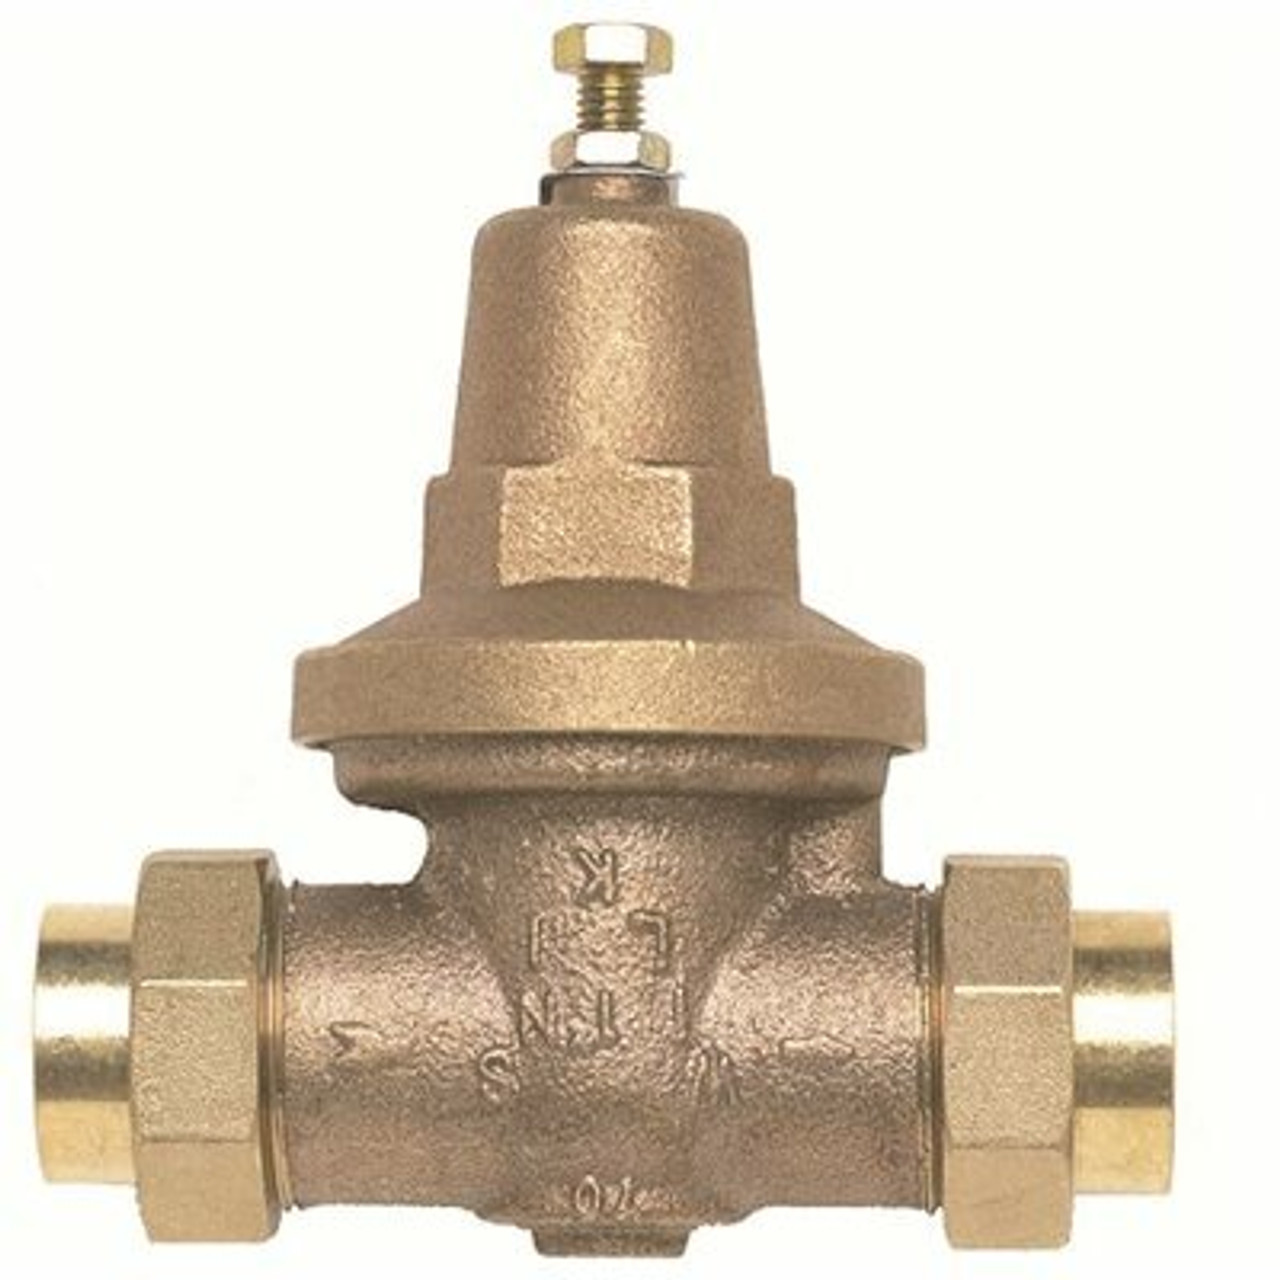 Zurn 1 In. Lead-Free Bronze Water Pressure Reducing Valve With Double Union Female Copper Sweat - 107544